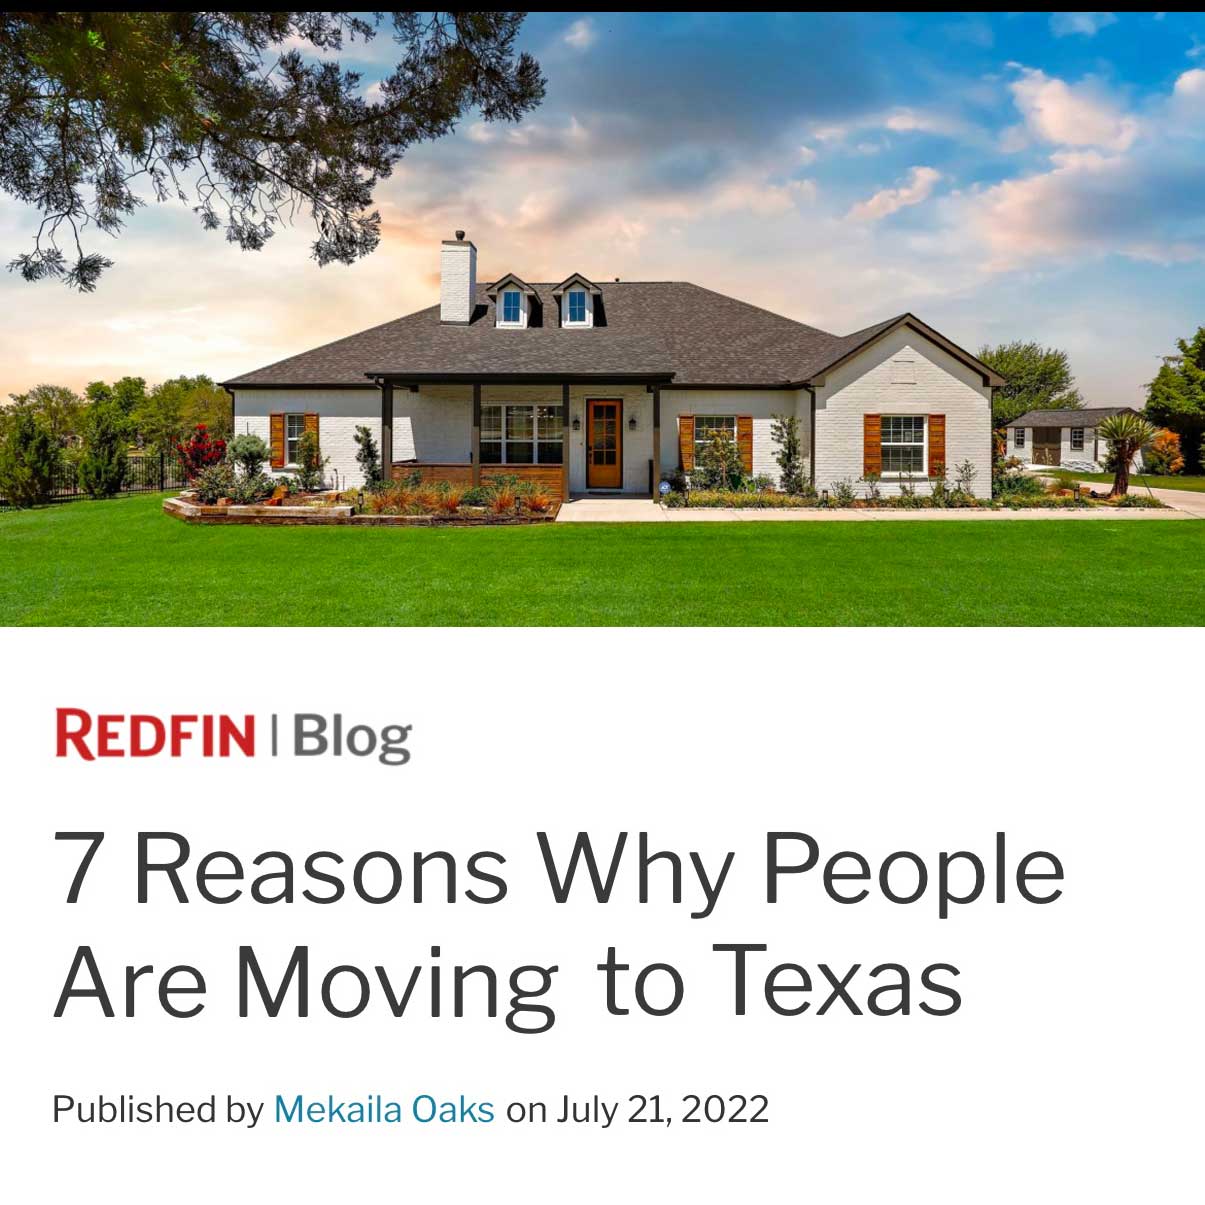 7 Reasons Why People Are Moving to Texas